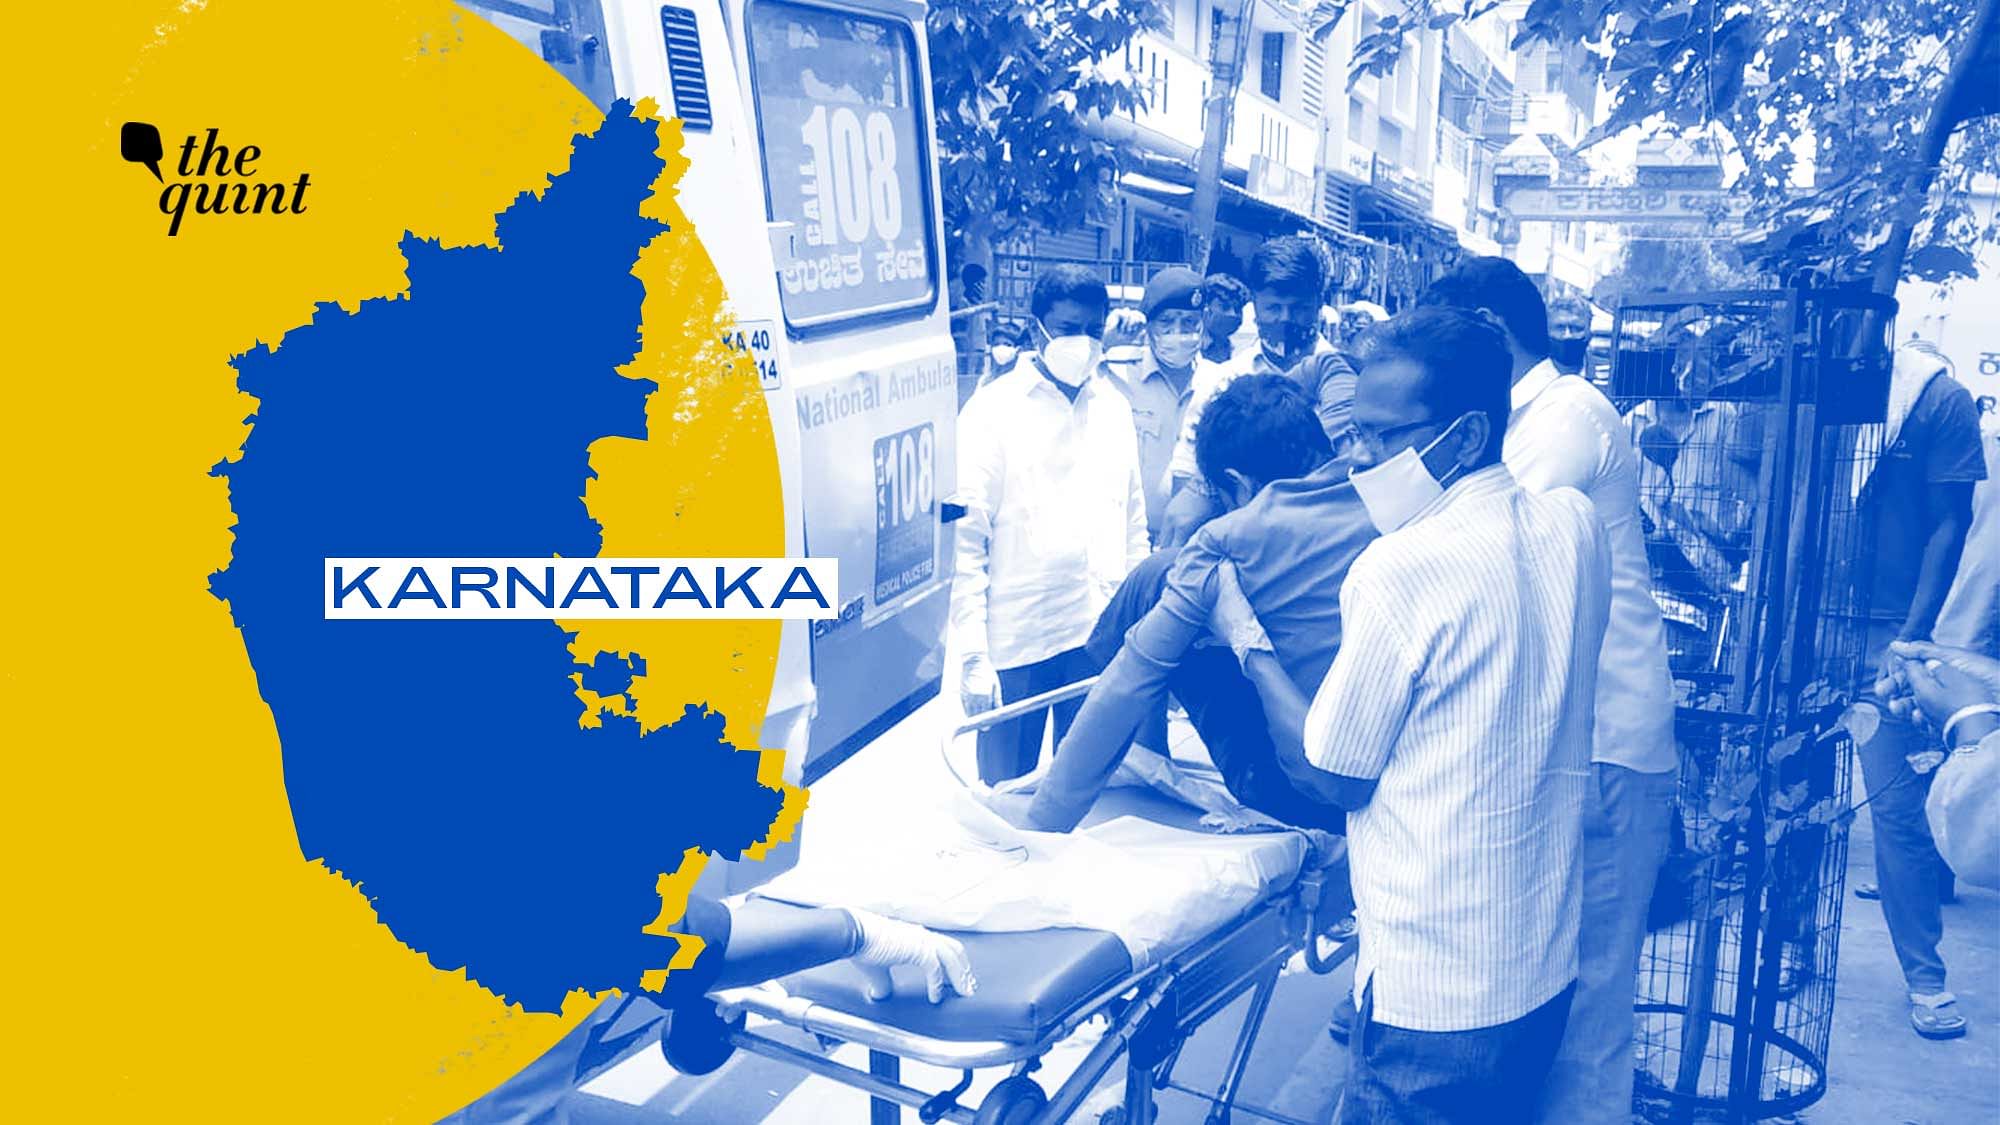 COVID-19 patients in Karnataka suffer on roads and pavements as health infrastructure crumbles.&nbsp;